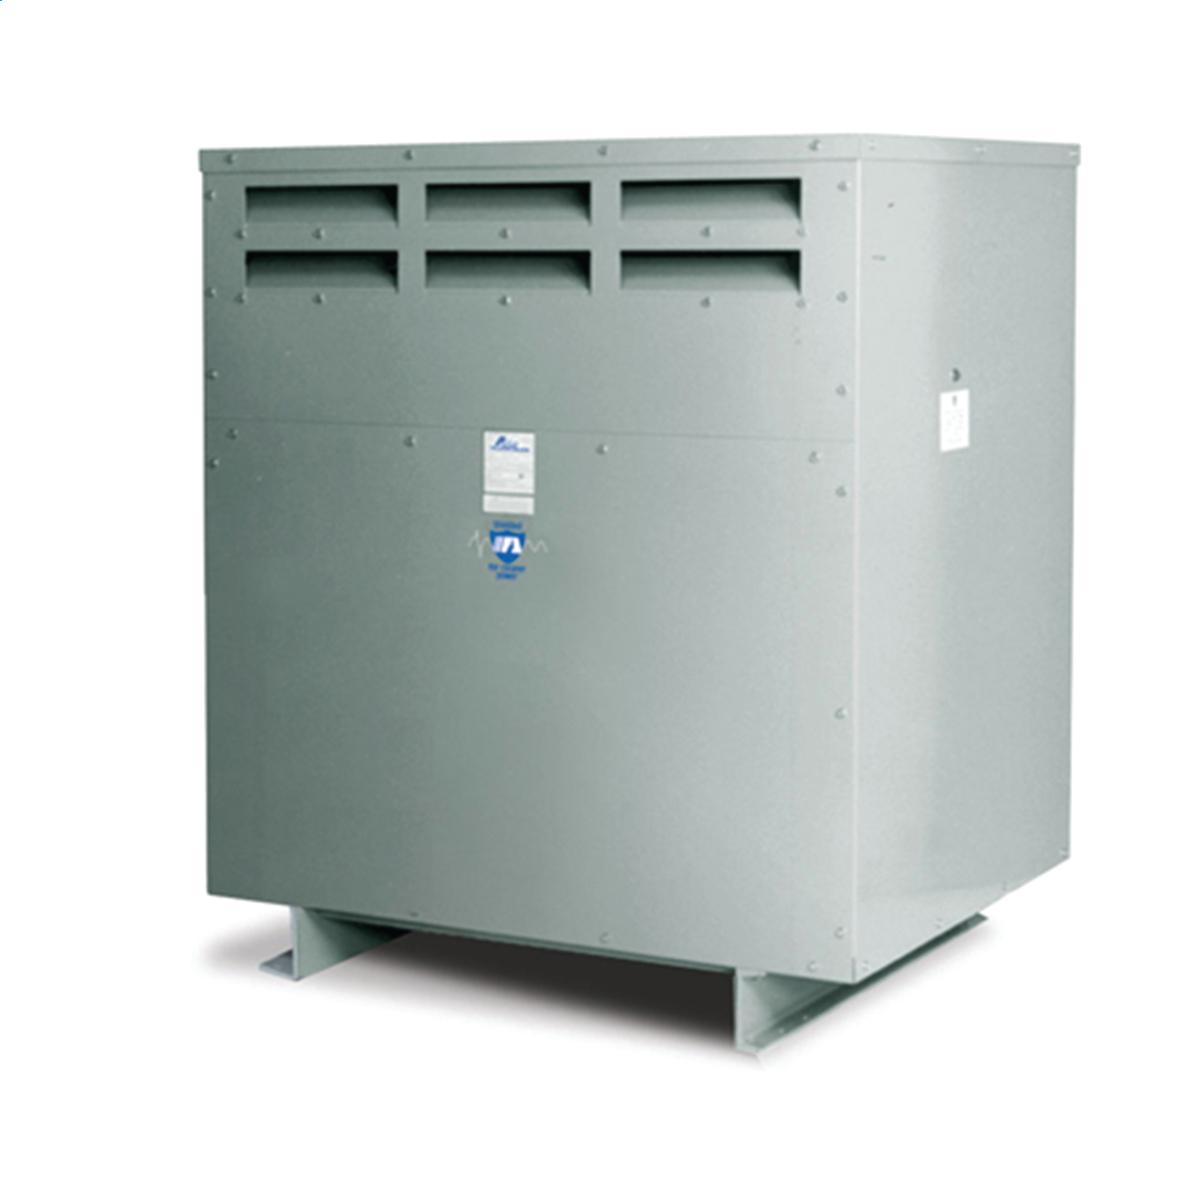 Hubbell WI001M19 Medium Voltage Transformer - Three Phase, 4160Δ - 480Y//277V, 1000kVA  ; Lower operating cost over Liquid-filled ; No additional fireproofing or venting ; Long life expectancy ; Smaller, lighter easy to maintain